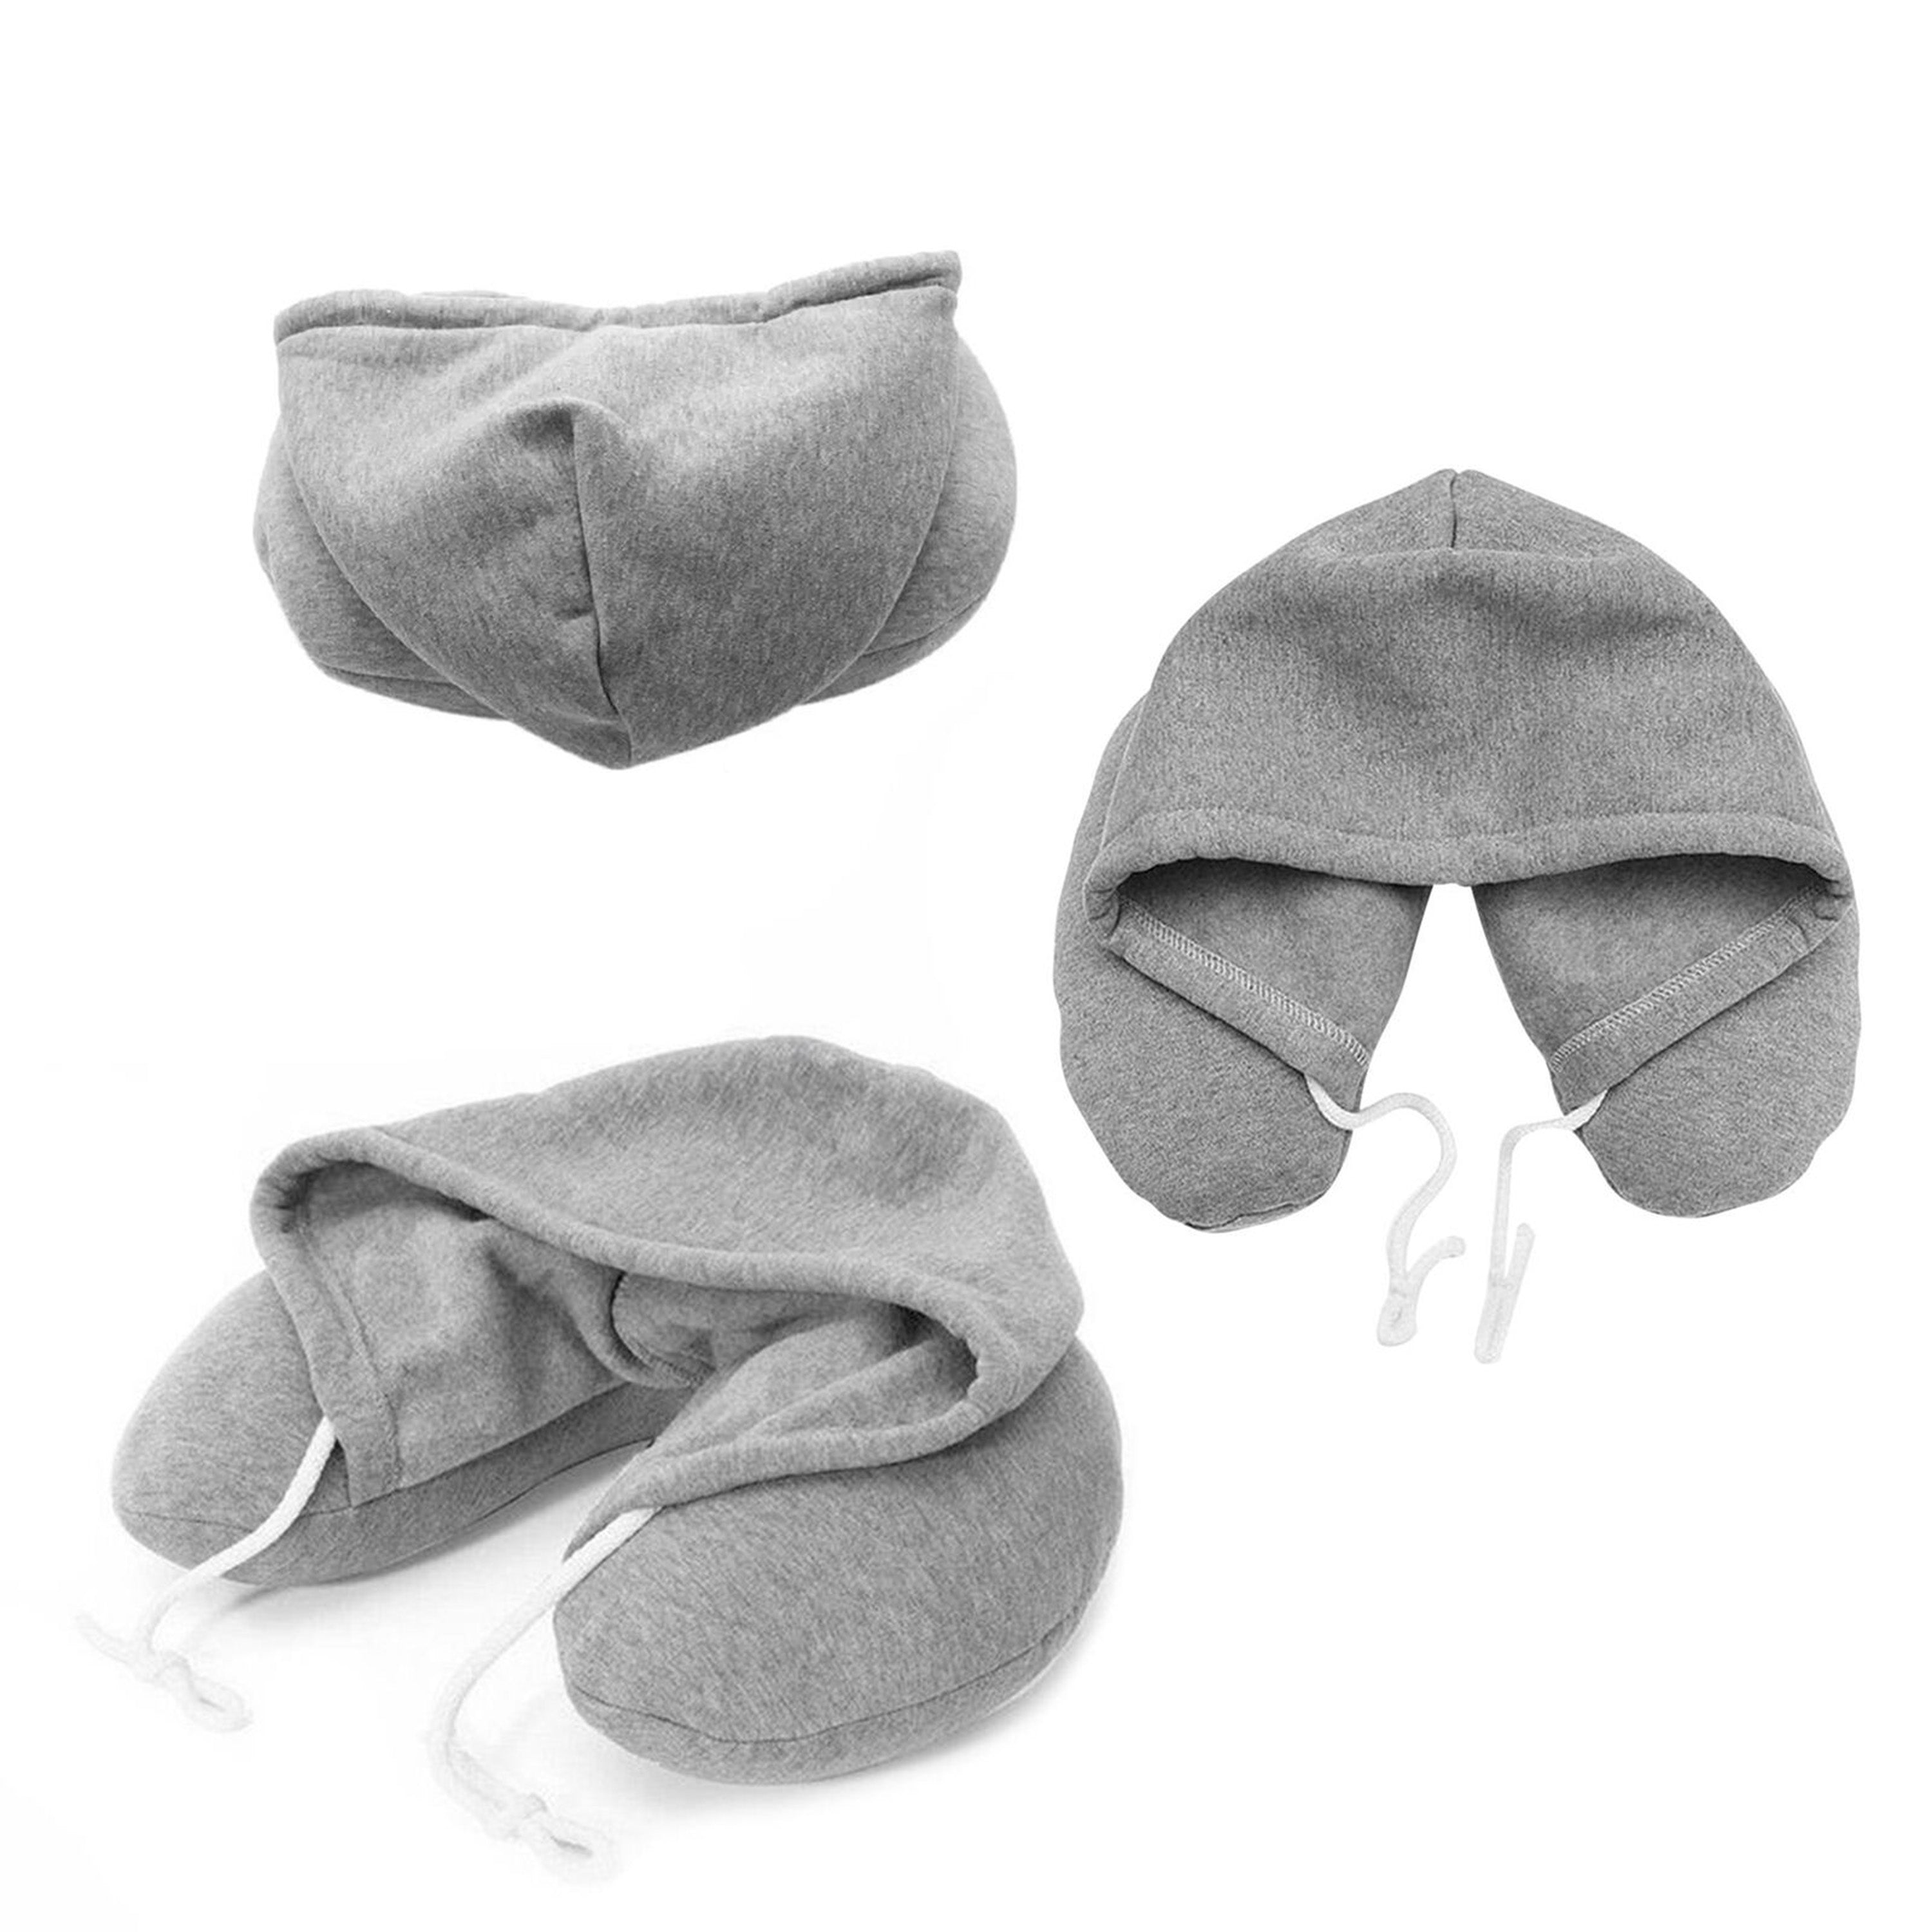 GEEZY Traveling Soft Hooded Neck Travel Pillow